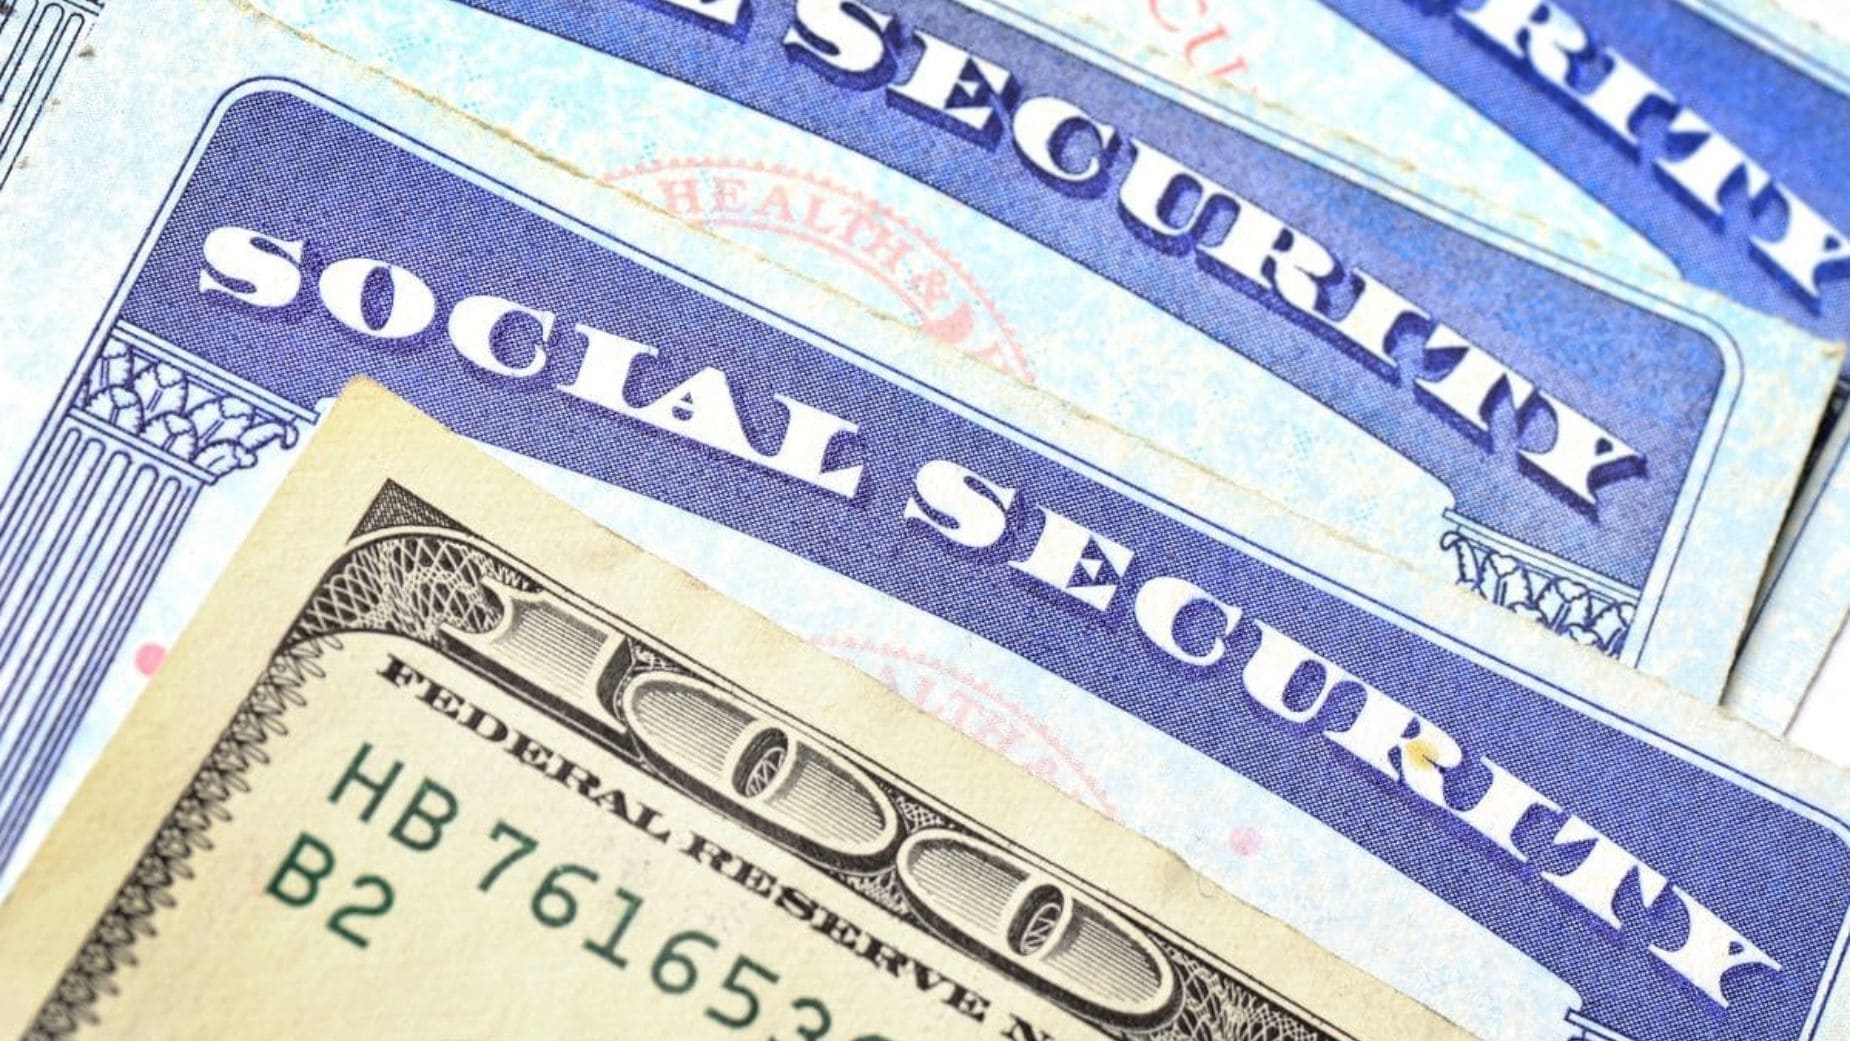 Social Security users get an increase every year thanks to COLA